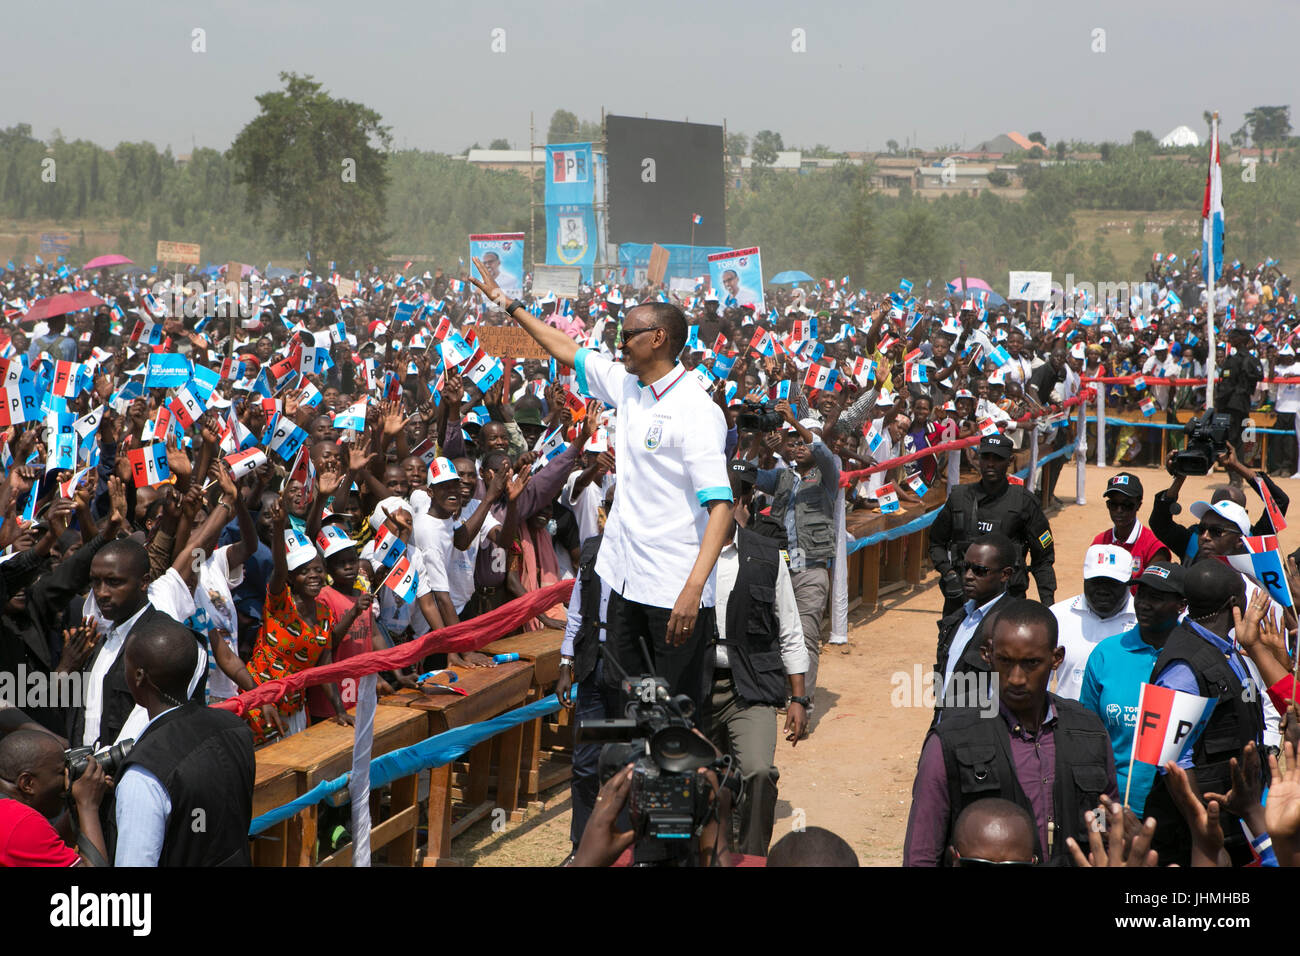 (170714) -- NYANZA (RWANDA), July 14, 2017 (Xinhua) -- Rwandan presidential candidate Paul Kagame (C), the incumbent President of Rwanda, greets his supporters at a presidential campaign rally in Nyanza, Rwanda, on July 14, 2017. Rwanda's presidential campaigns officially kicked off on Friday. The ruling party Rwanda Patriotic Front (RPF)'s presidential candidate Paul Kagame, who is seeking a third term, has launched his campaigns in his childhood home town of Ruhango District, Southern Rwanda. (Xinhua/Gabriel Dusabe) Stock Photo